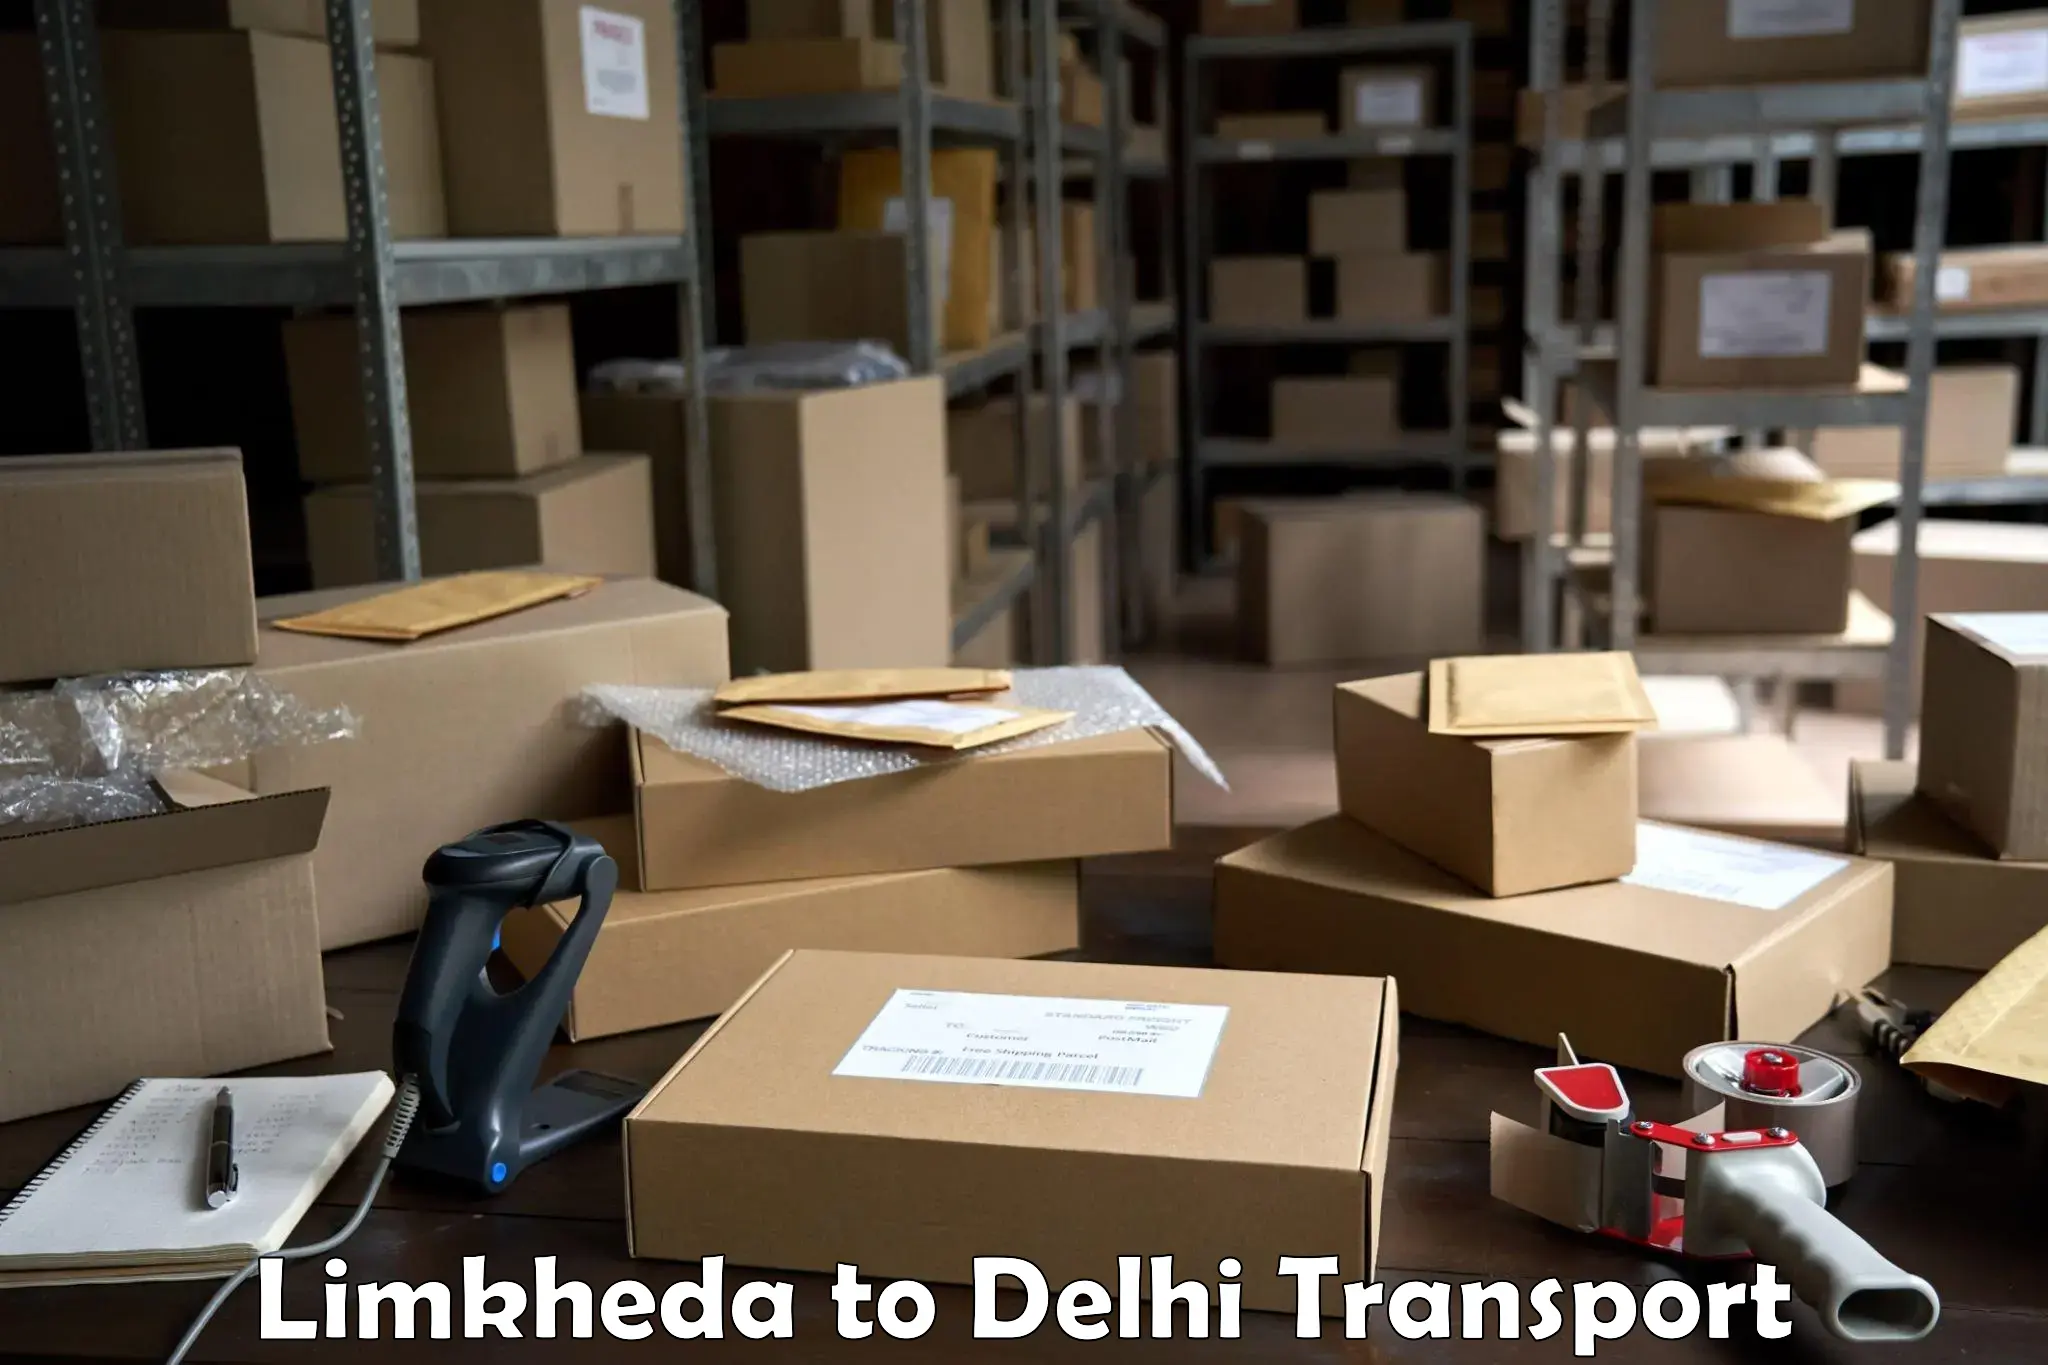 Container transport service Limkheda to East Delhi